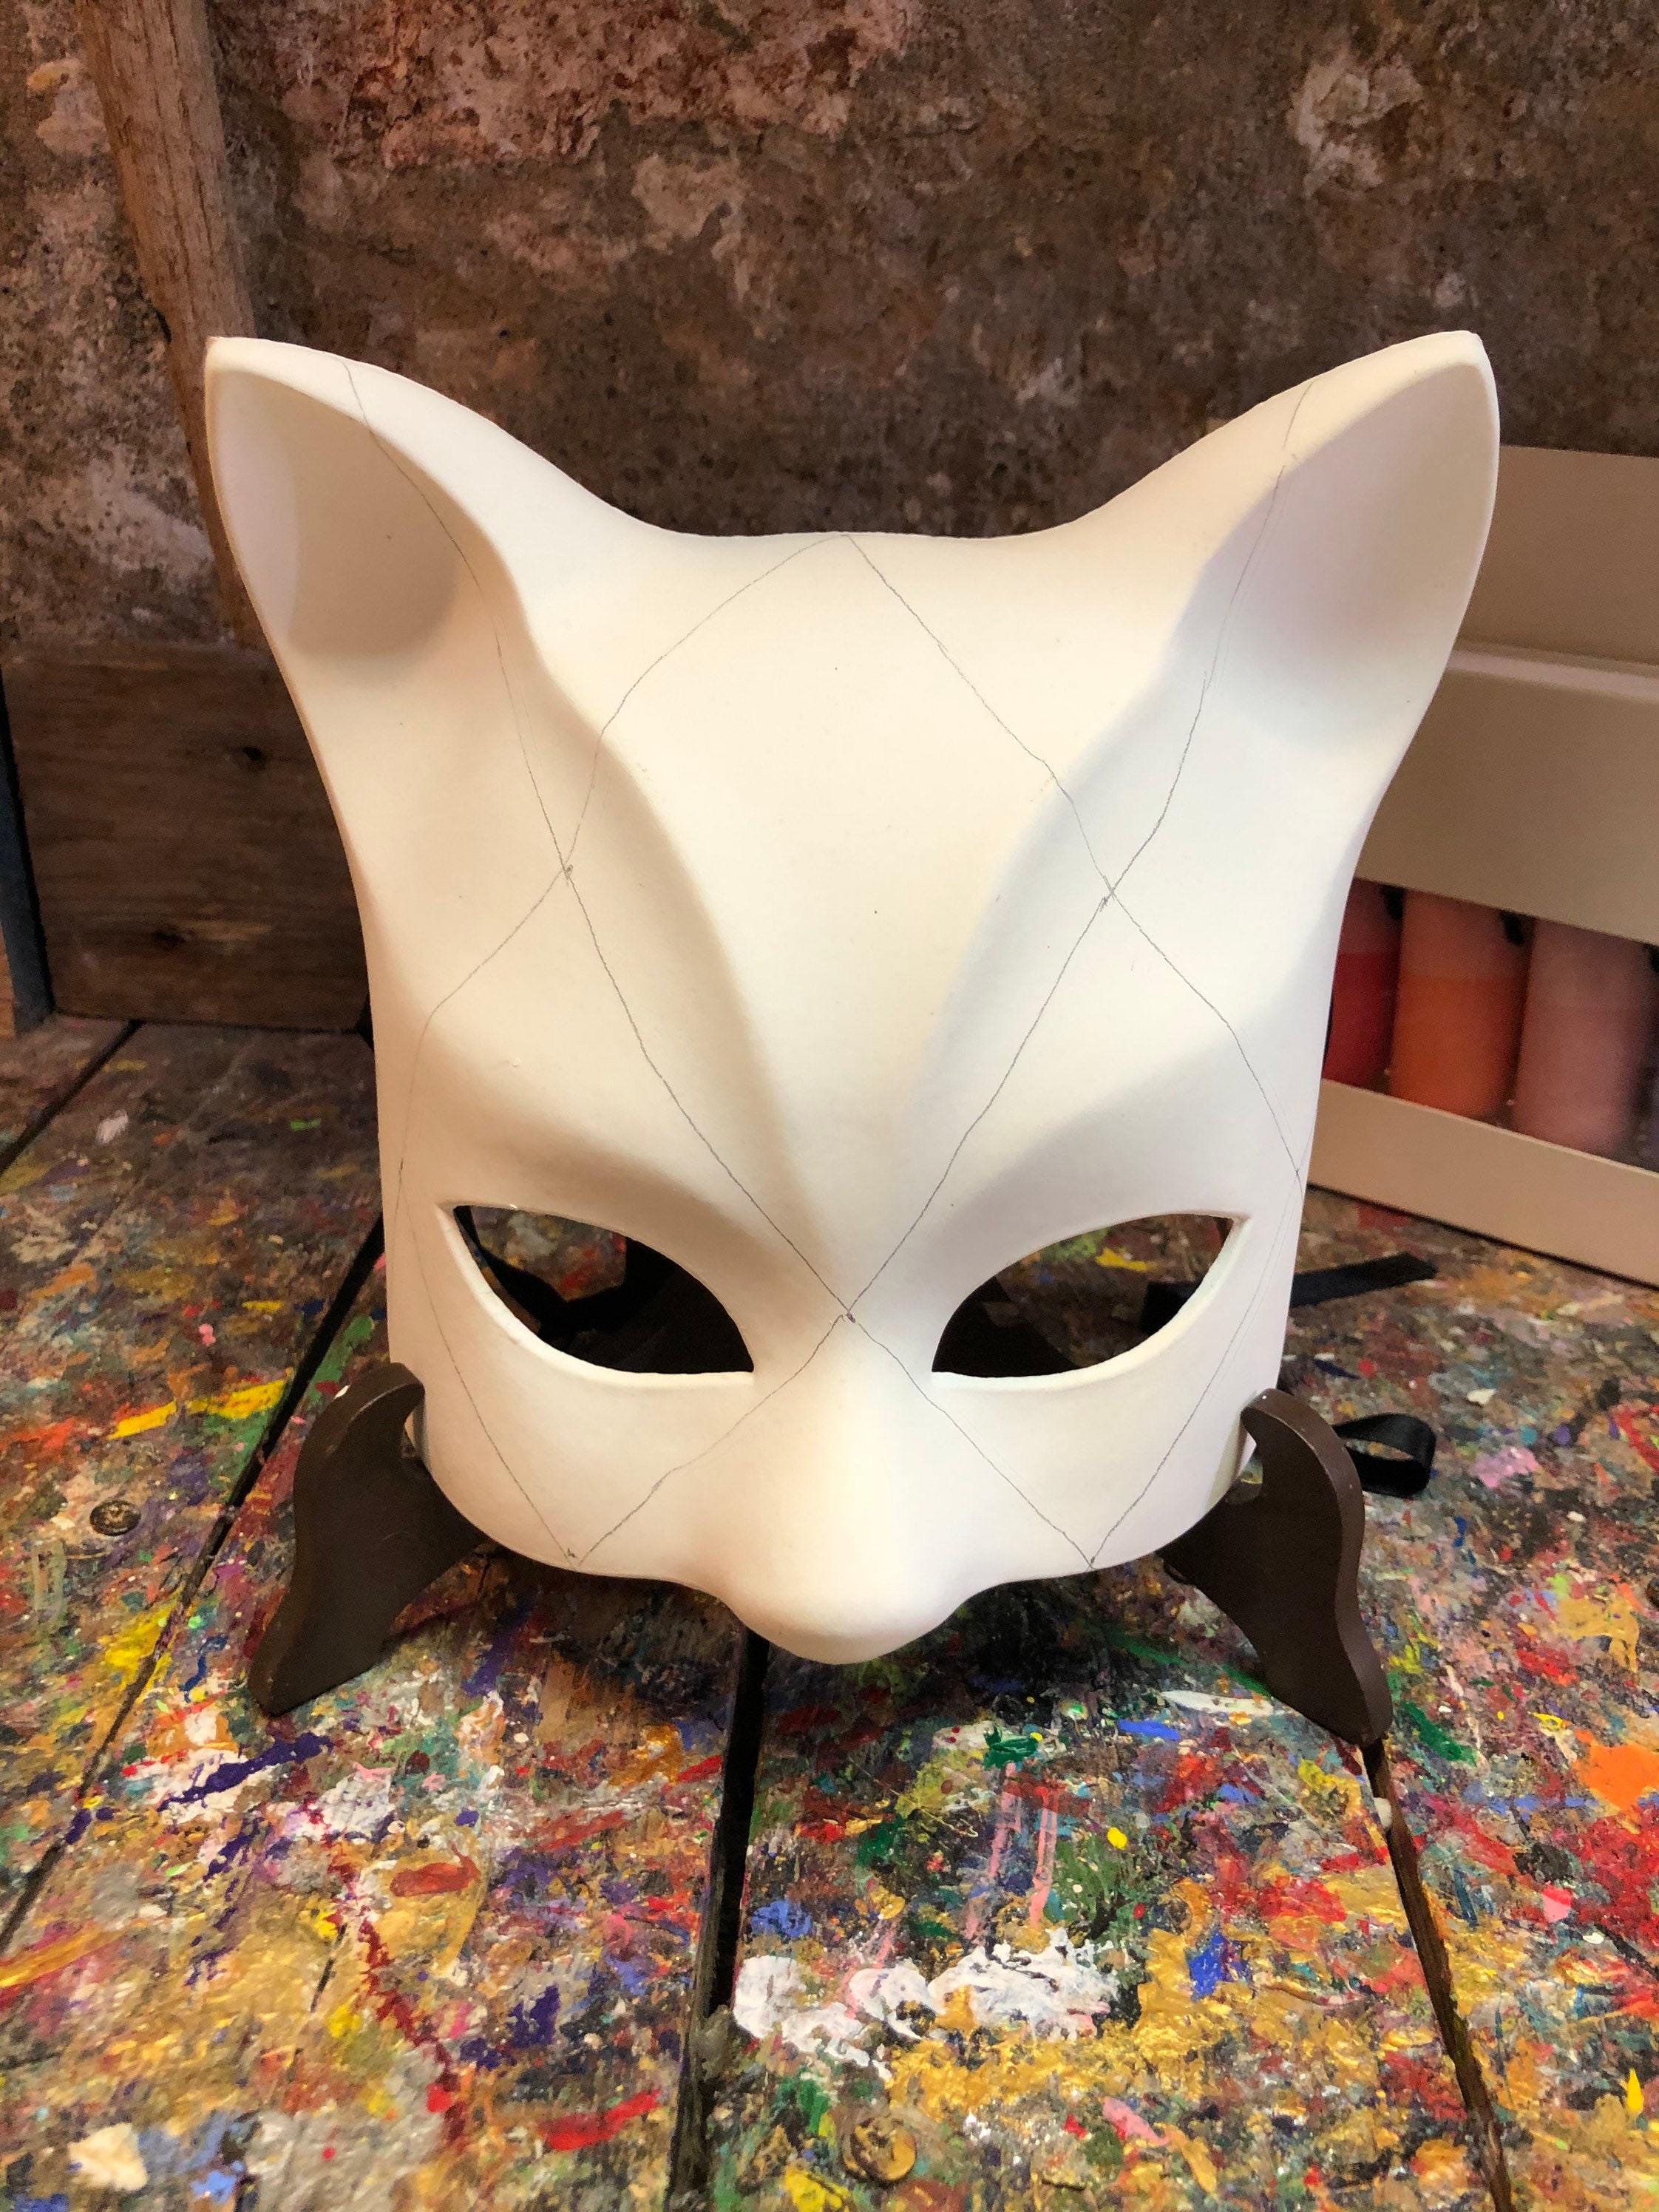 Cat Mask With Color Set and Brushes White Cat Mask to Paint Venetian  Carnival Mask 